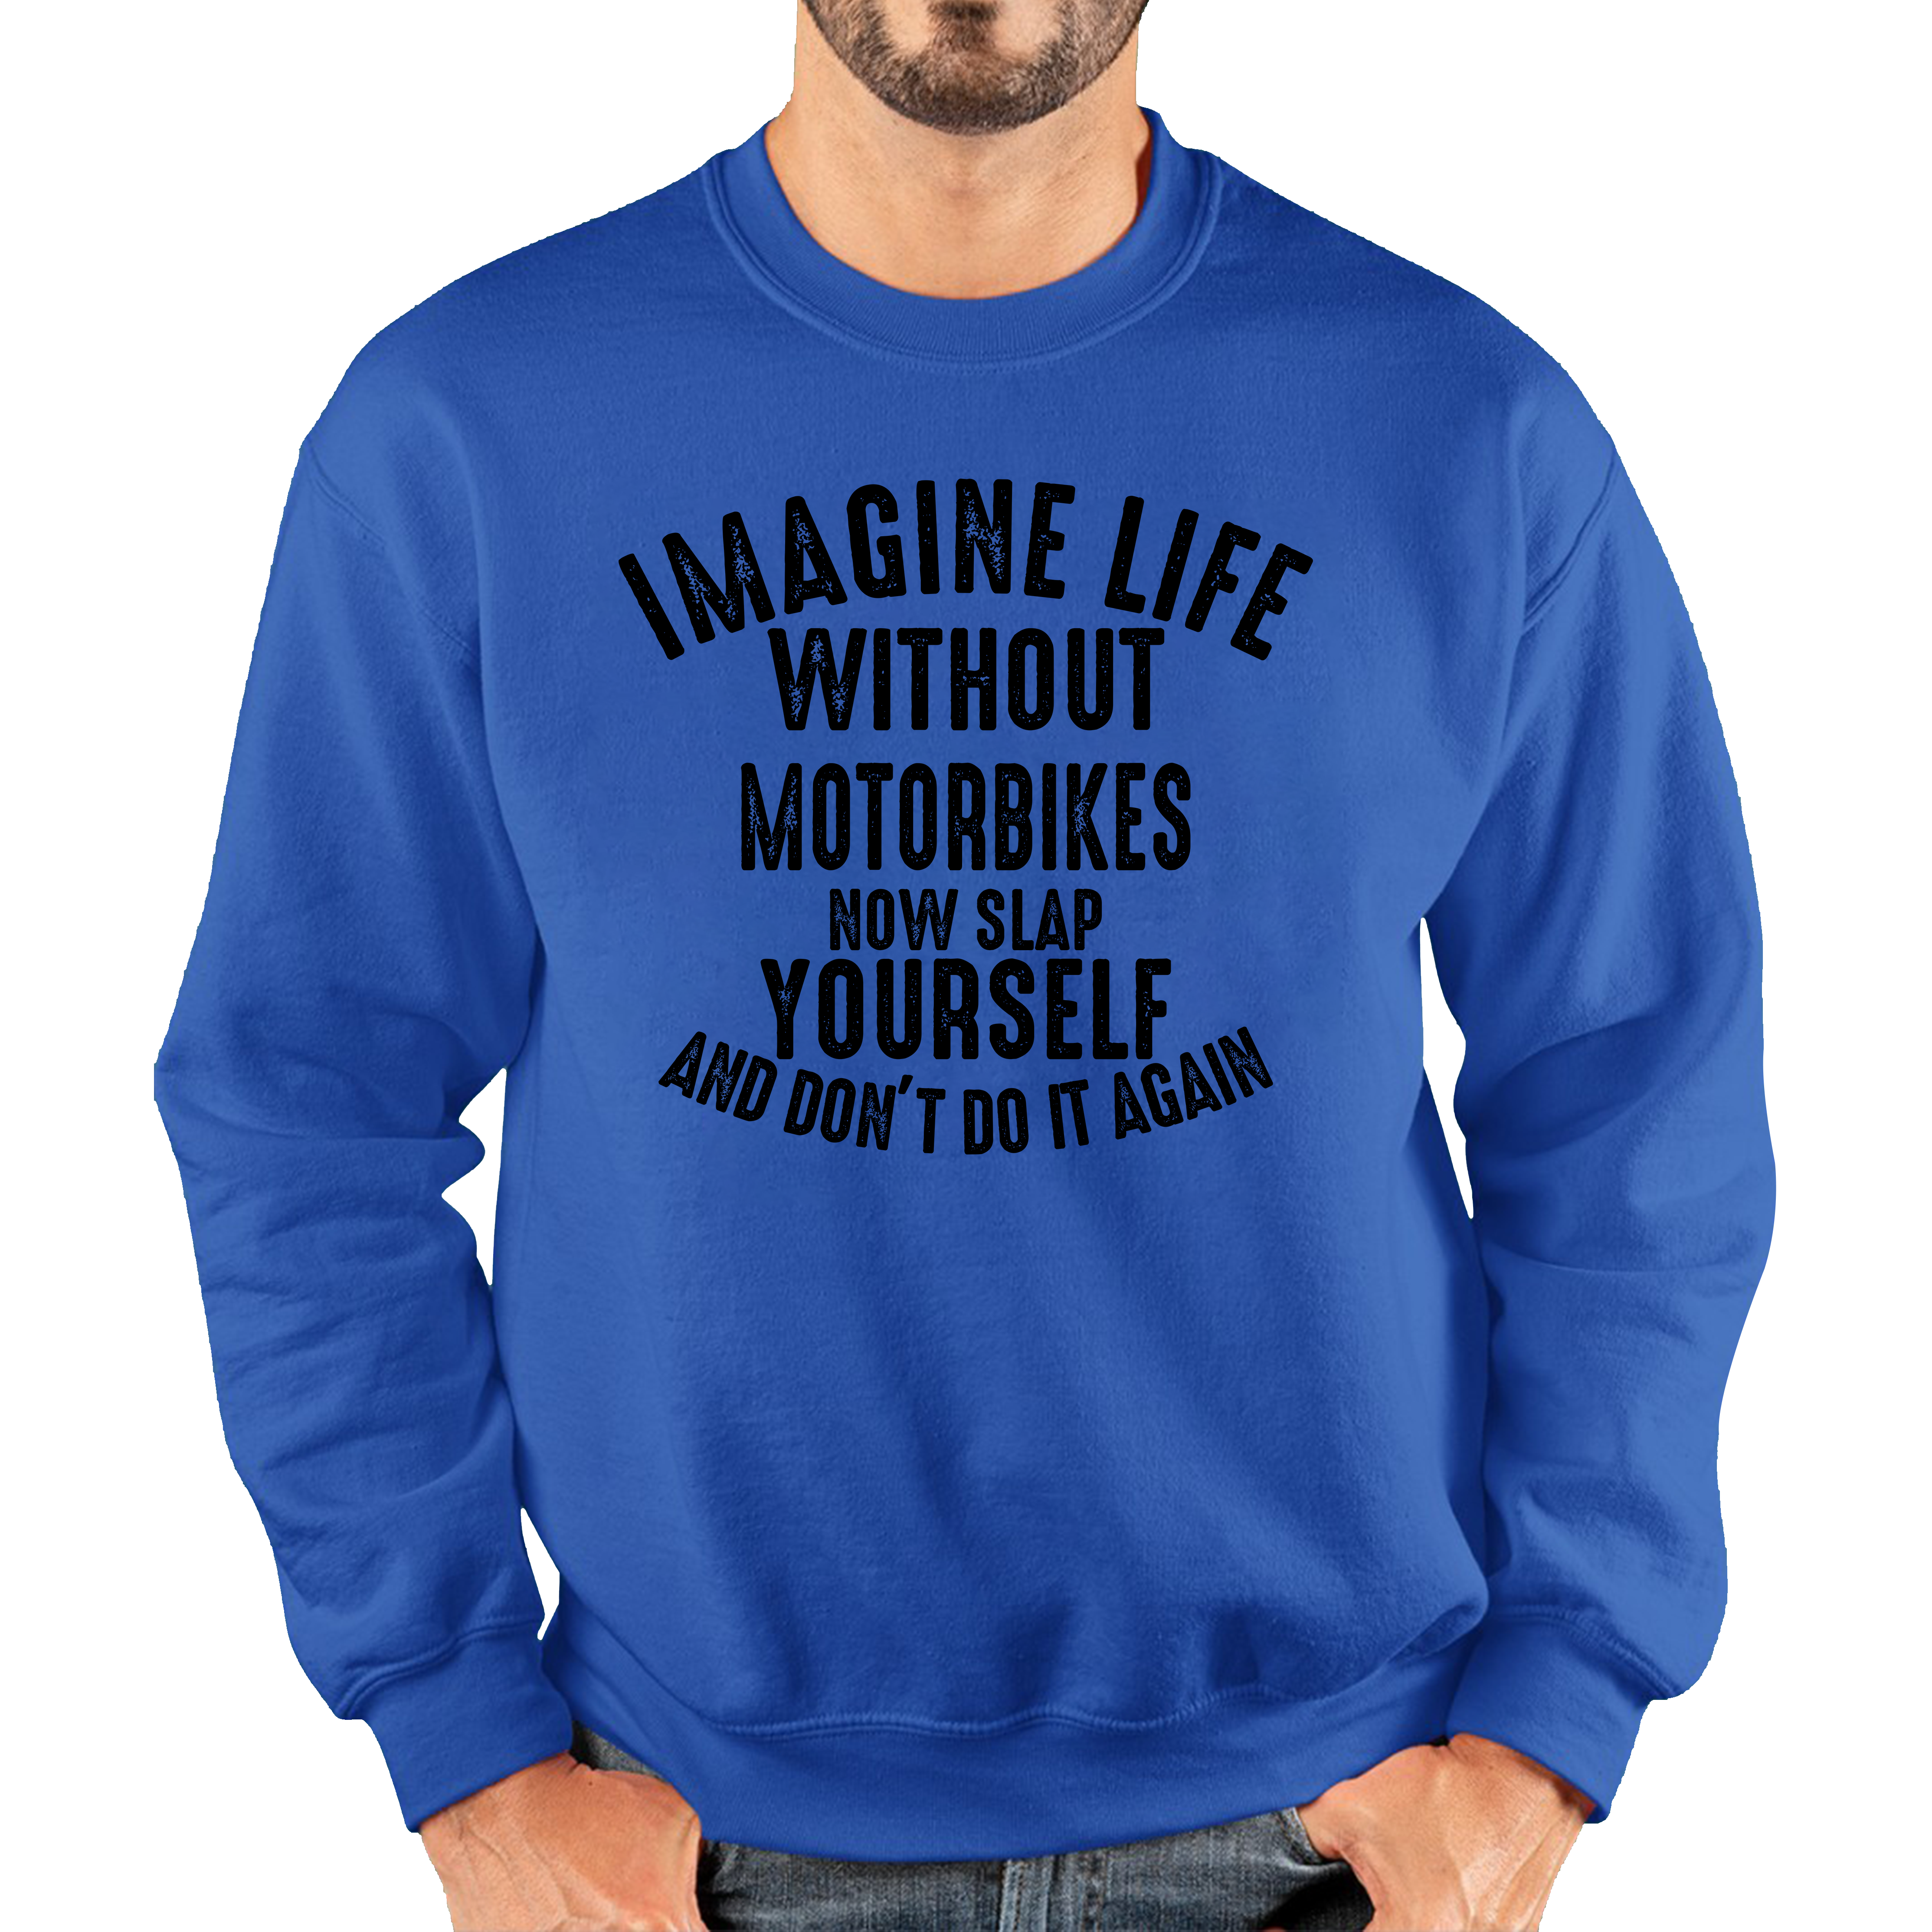 Imagine Life Without Motorbikes Now Slap Yourself And Don' Do It Again Jumper Bike Lovers Racers Riders Funny Joke Unisex Sweatshirt